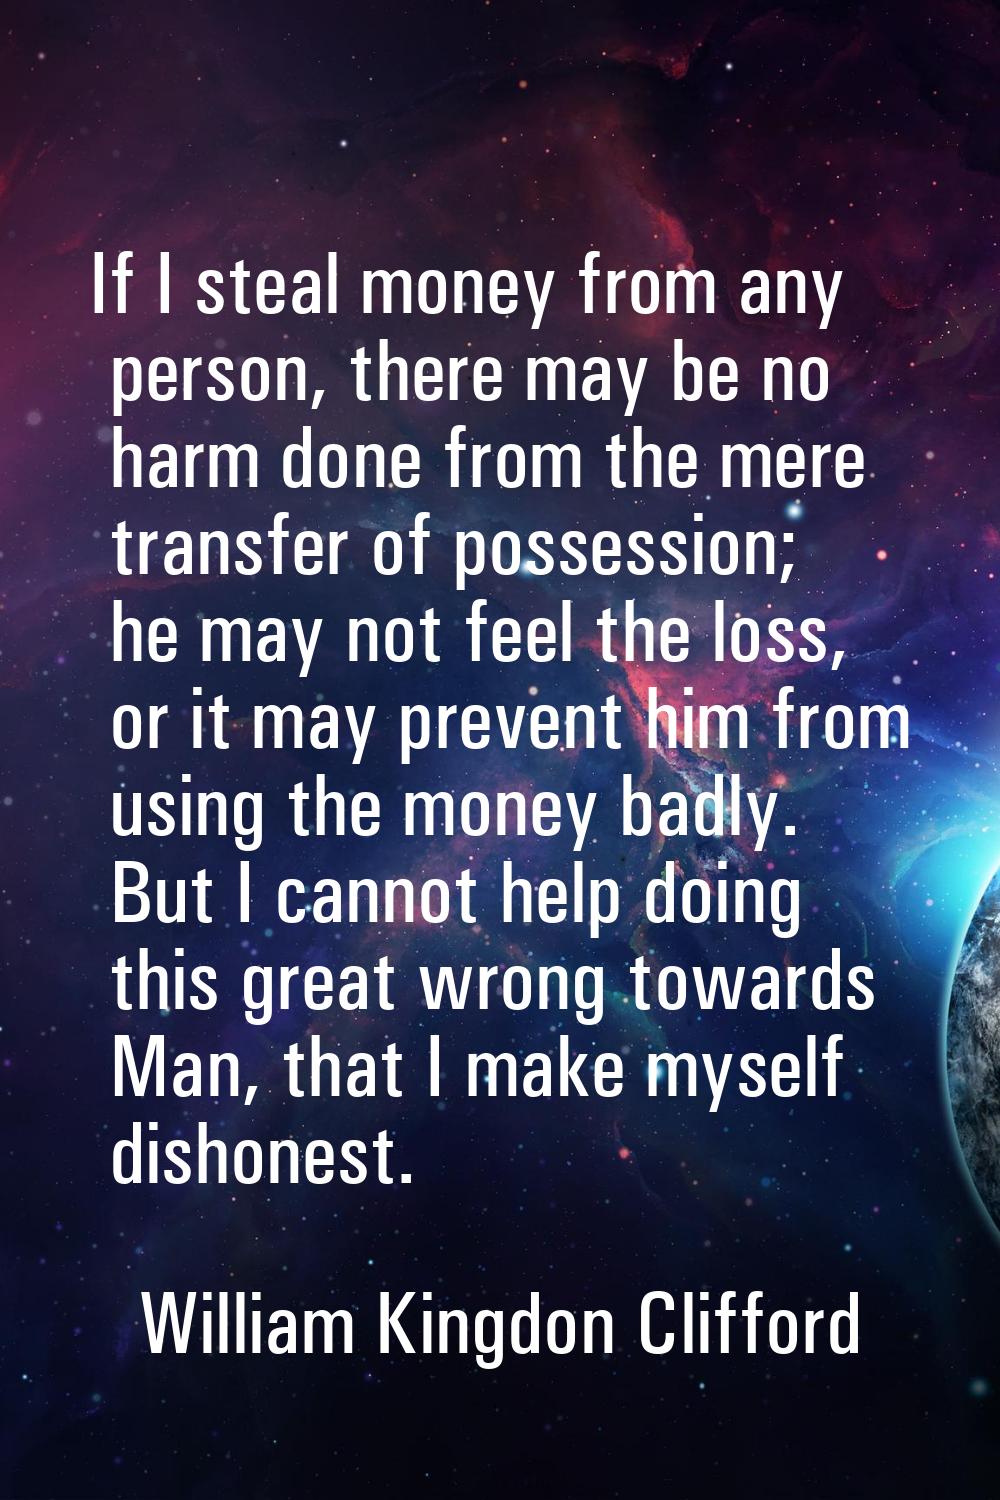 If I steal money from any person, there may be no harm done from the mere transfer of possession; h